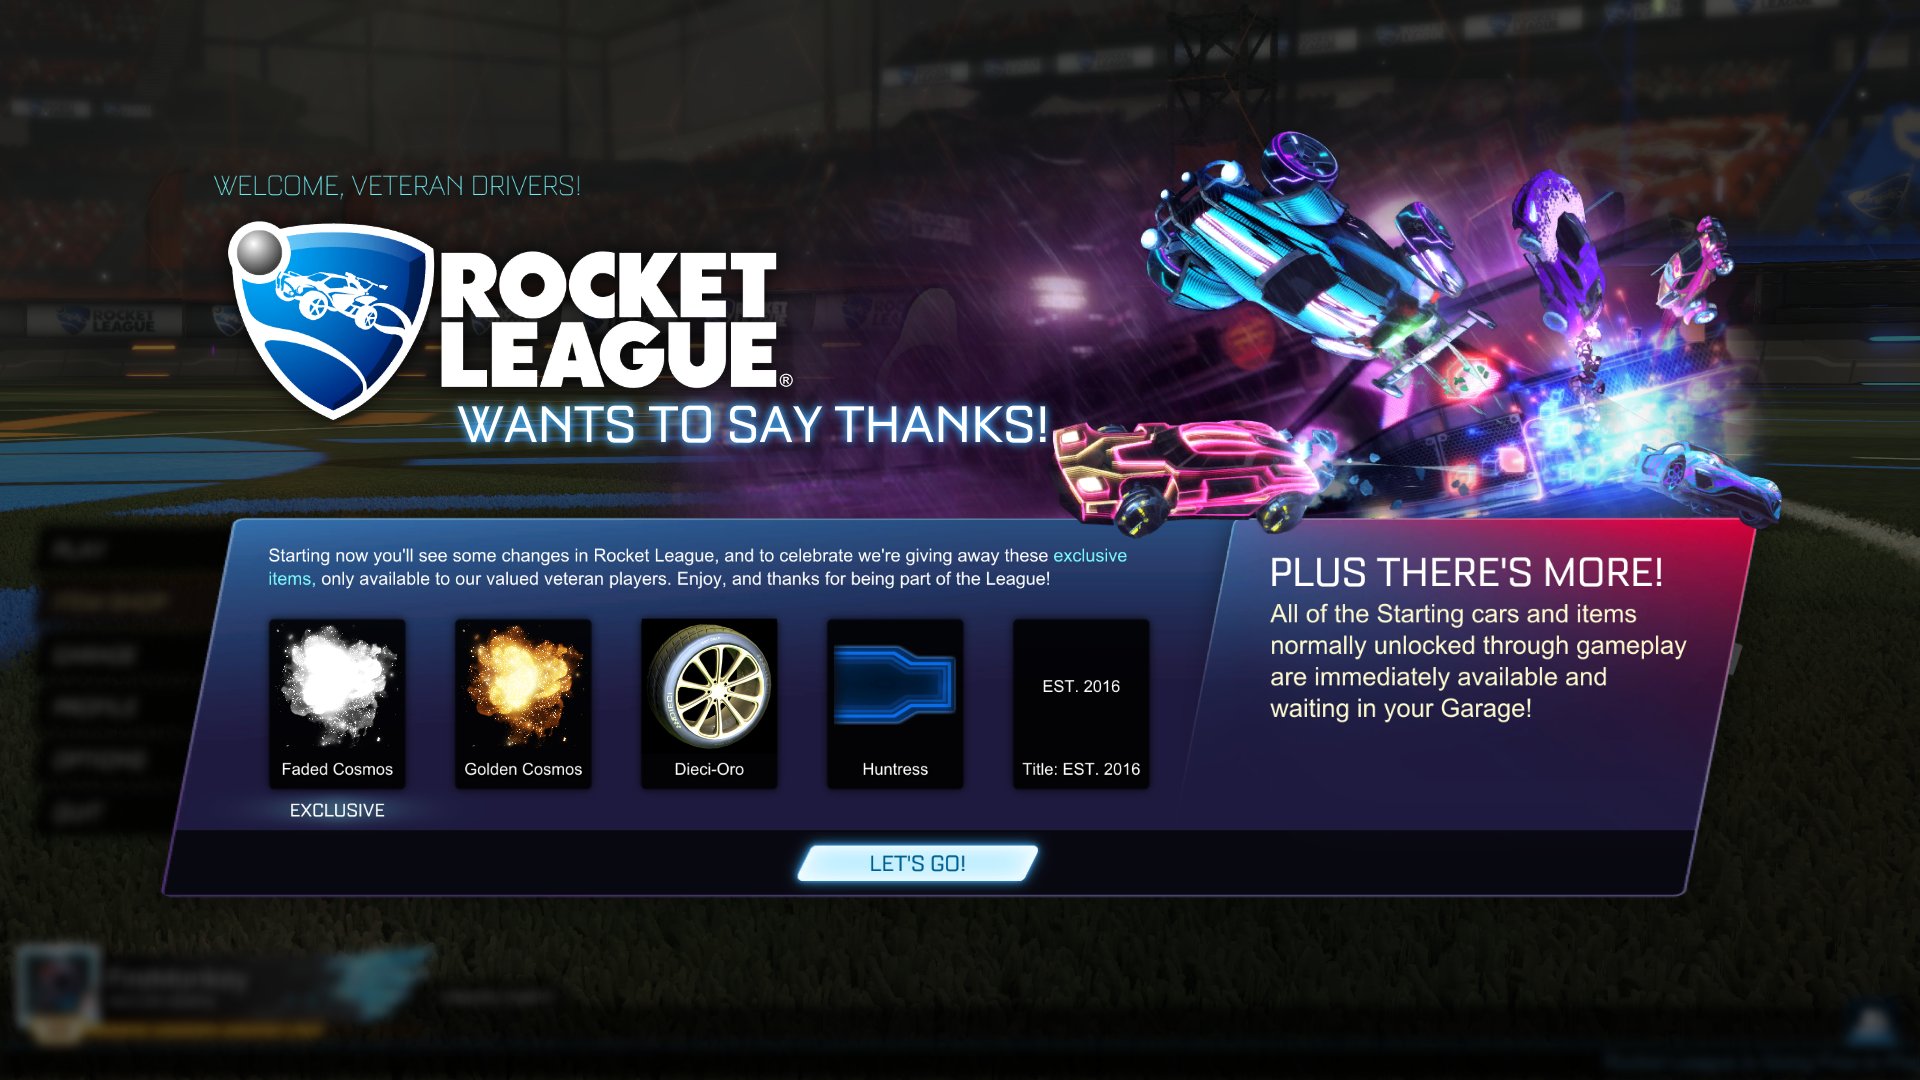 iFireMonkey on Twitter: "[Rocket League Thread] This thread will go over the changes pushed to the Steam, Switch, Xbox, and PS4 version the game today. The game is still not out